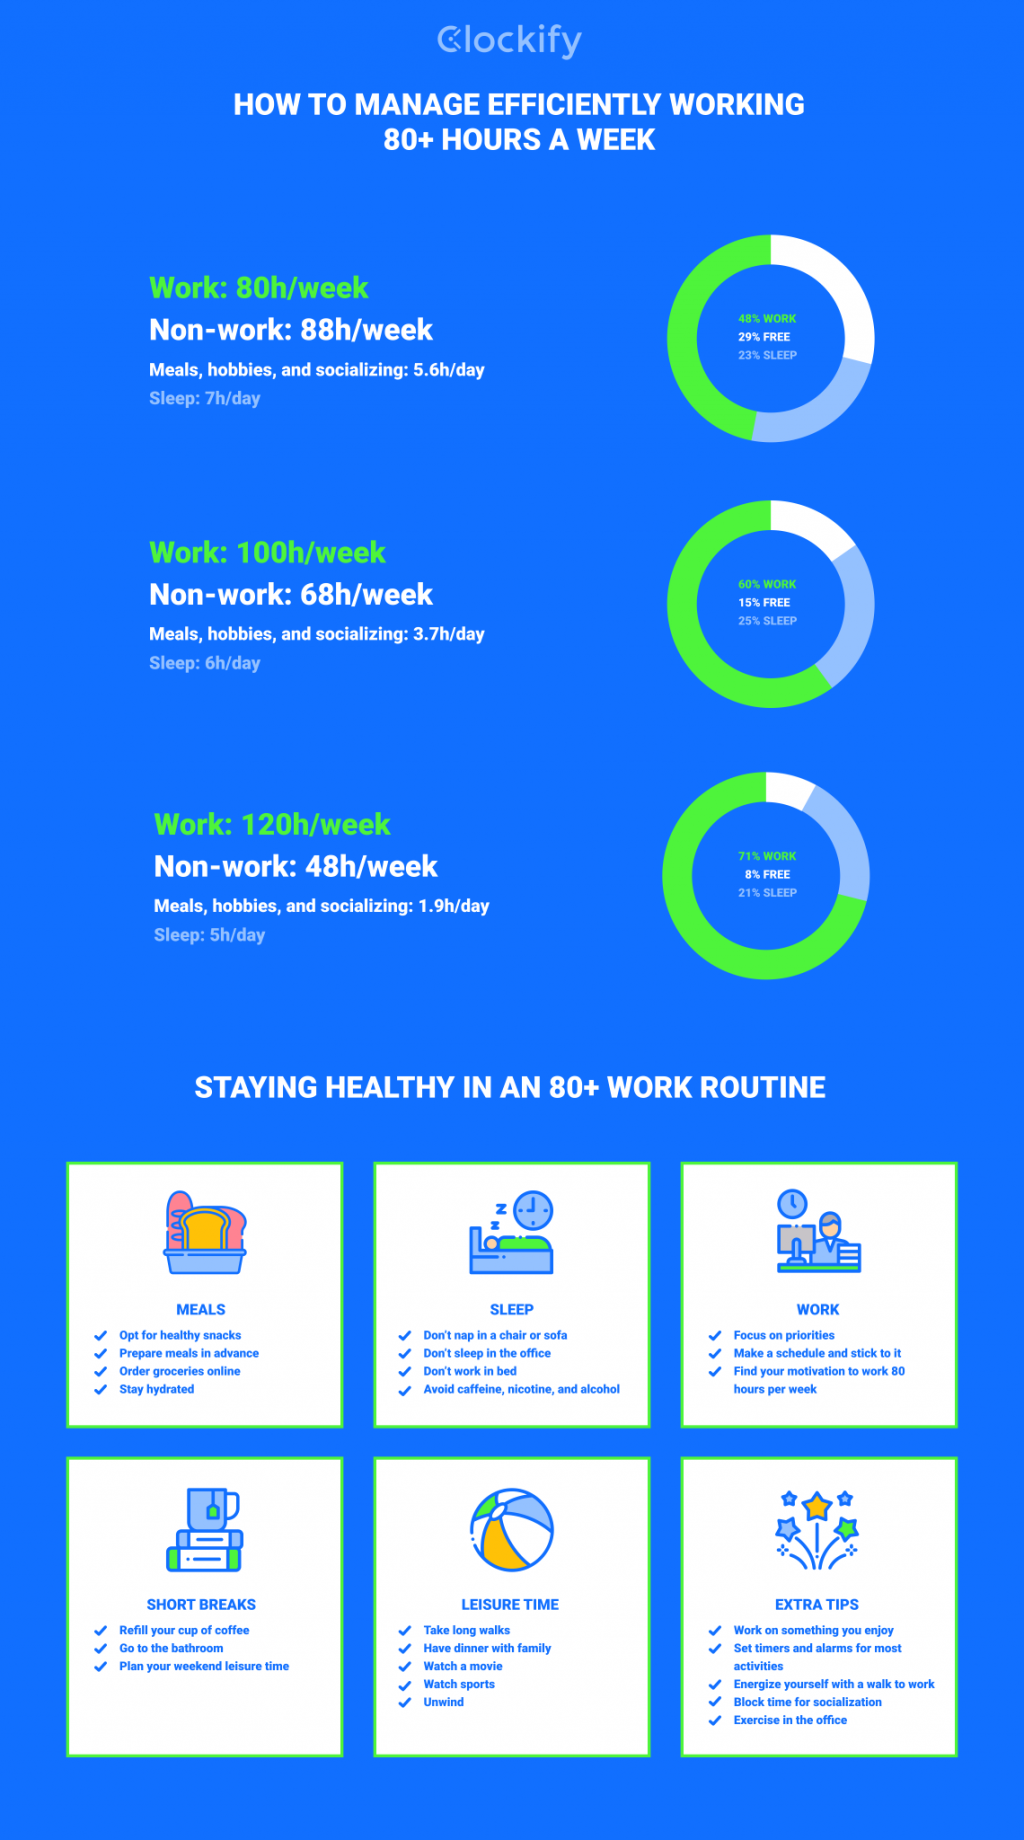 How to manage efficiently working 80+ hours a week - infographic